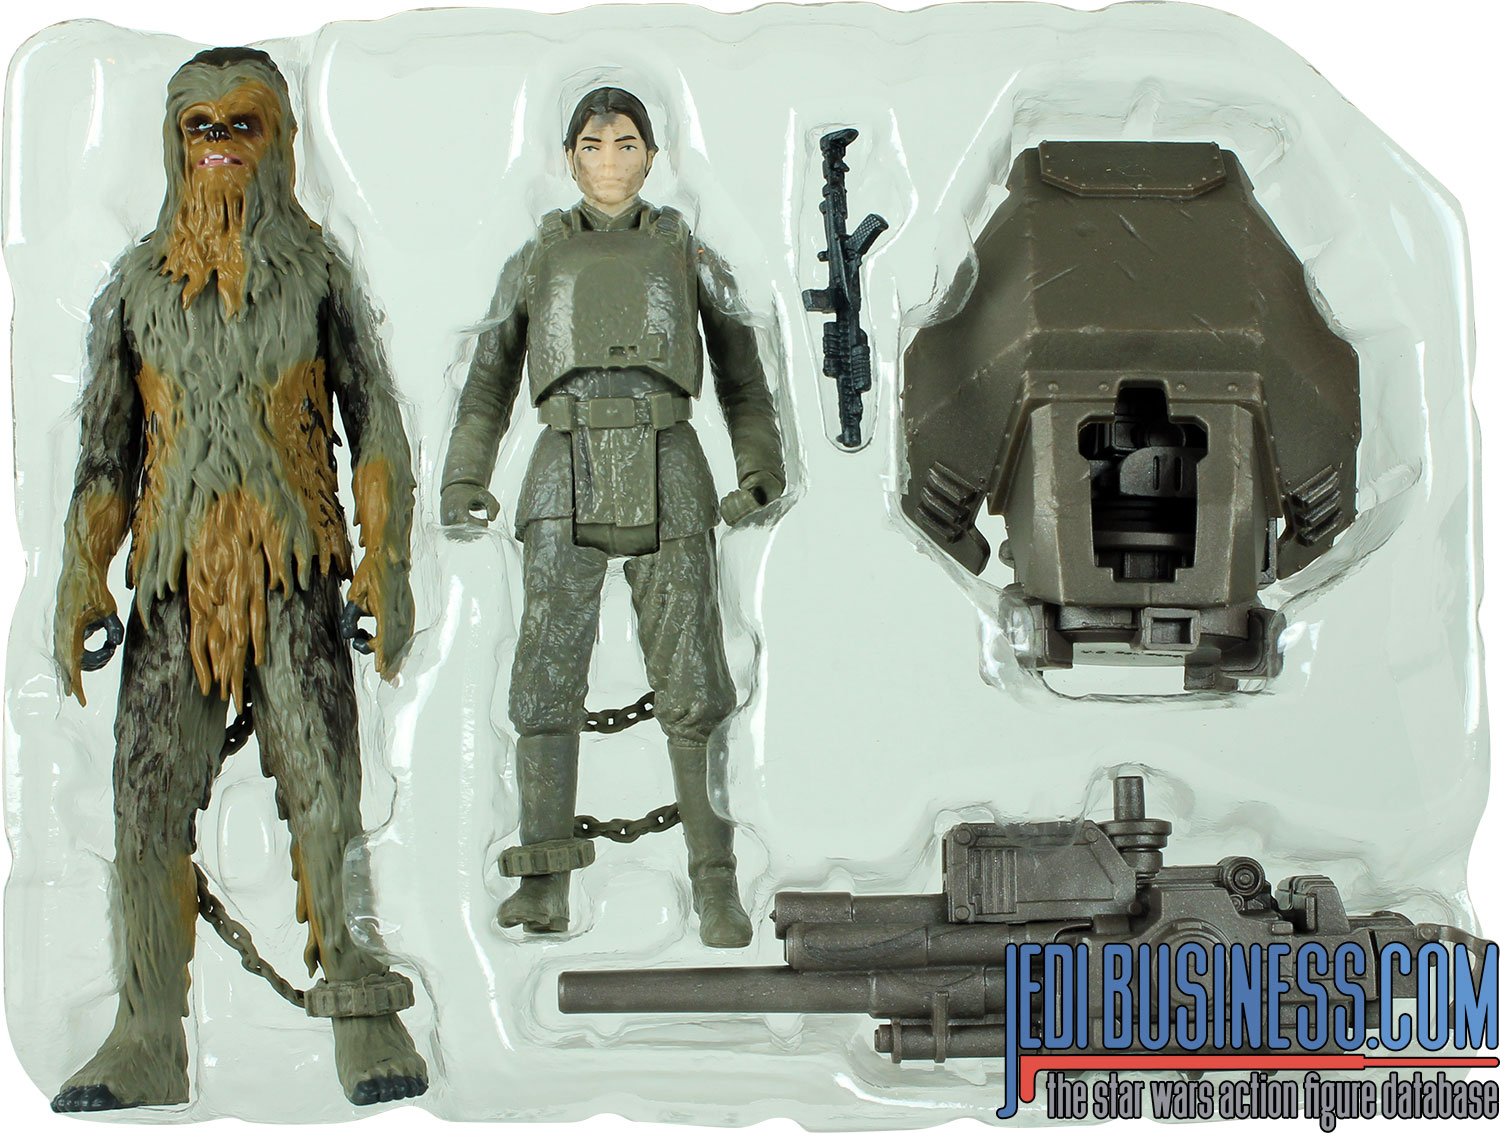 Chewbacca 2-Pack #4 With Han Solo (Mimban)